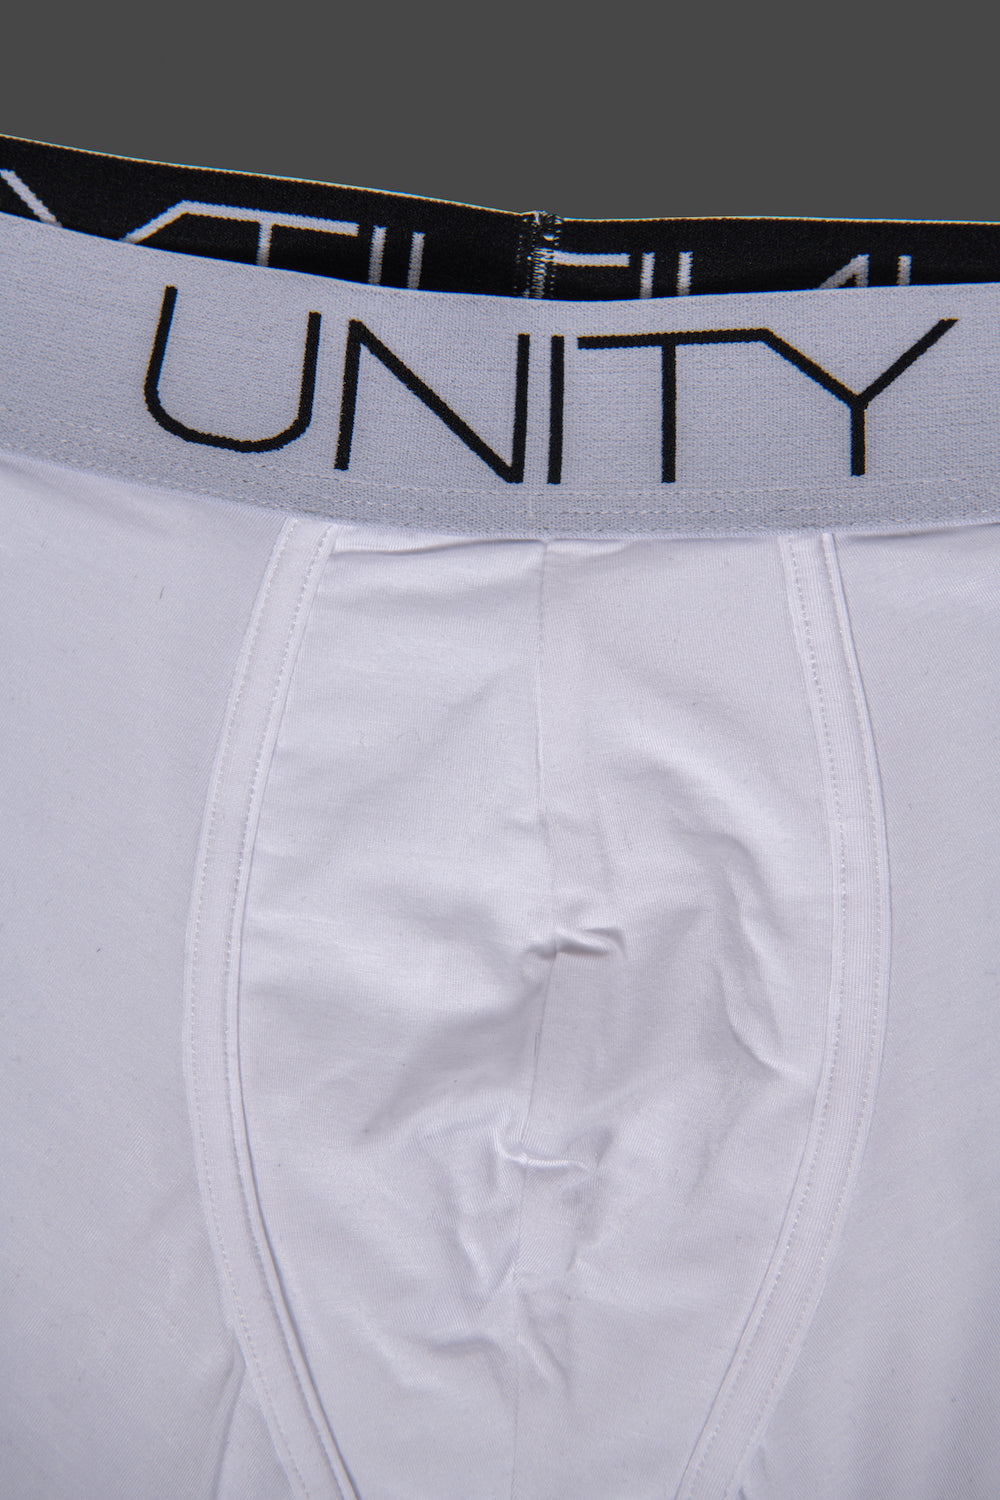 Simply White Unity Underwear - The Most Comfortable Underwear For Men – Unity  Underwear Co